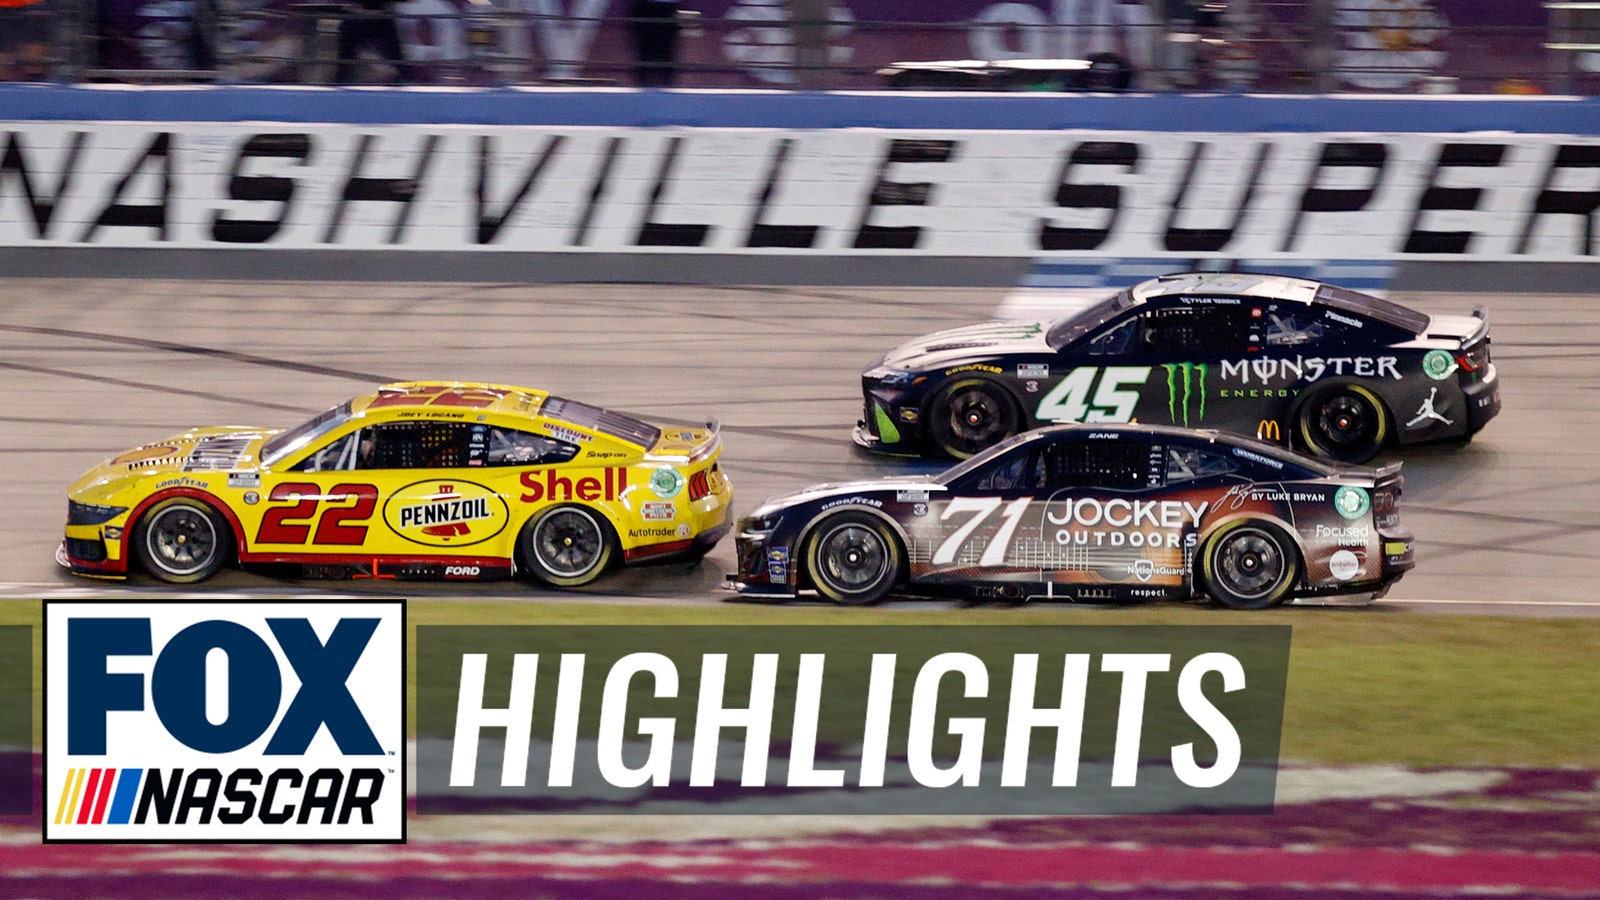 Check out the chaotic final laps of the Ally 400!